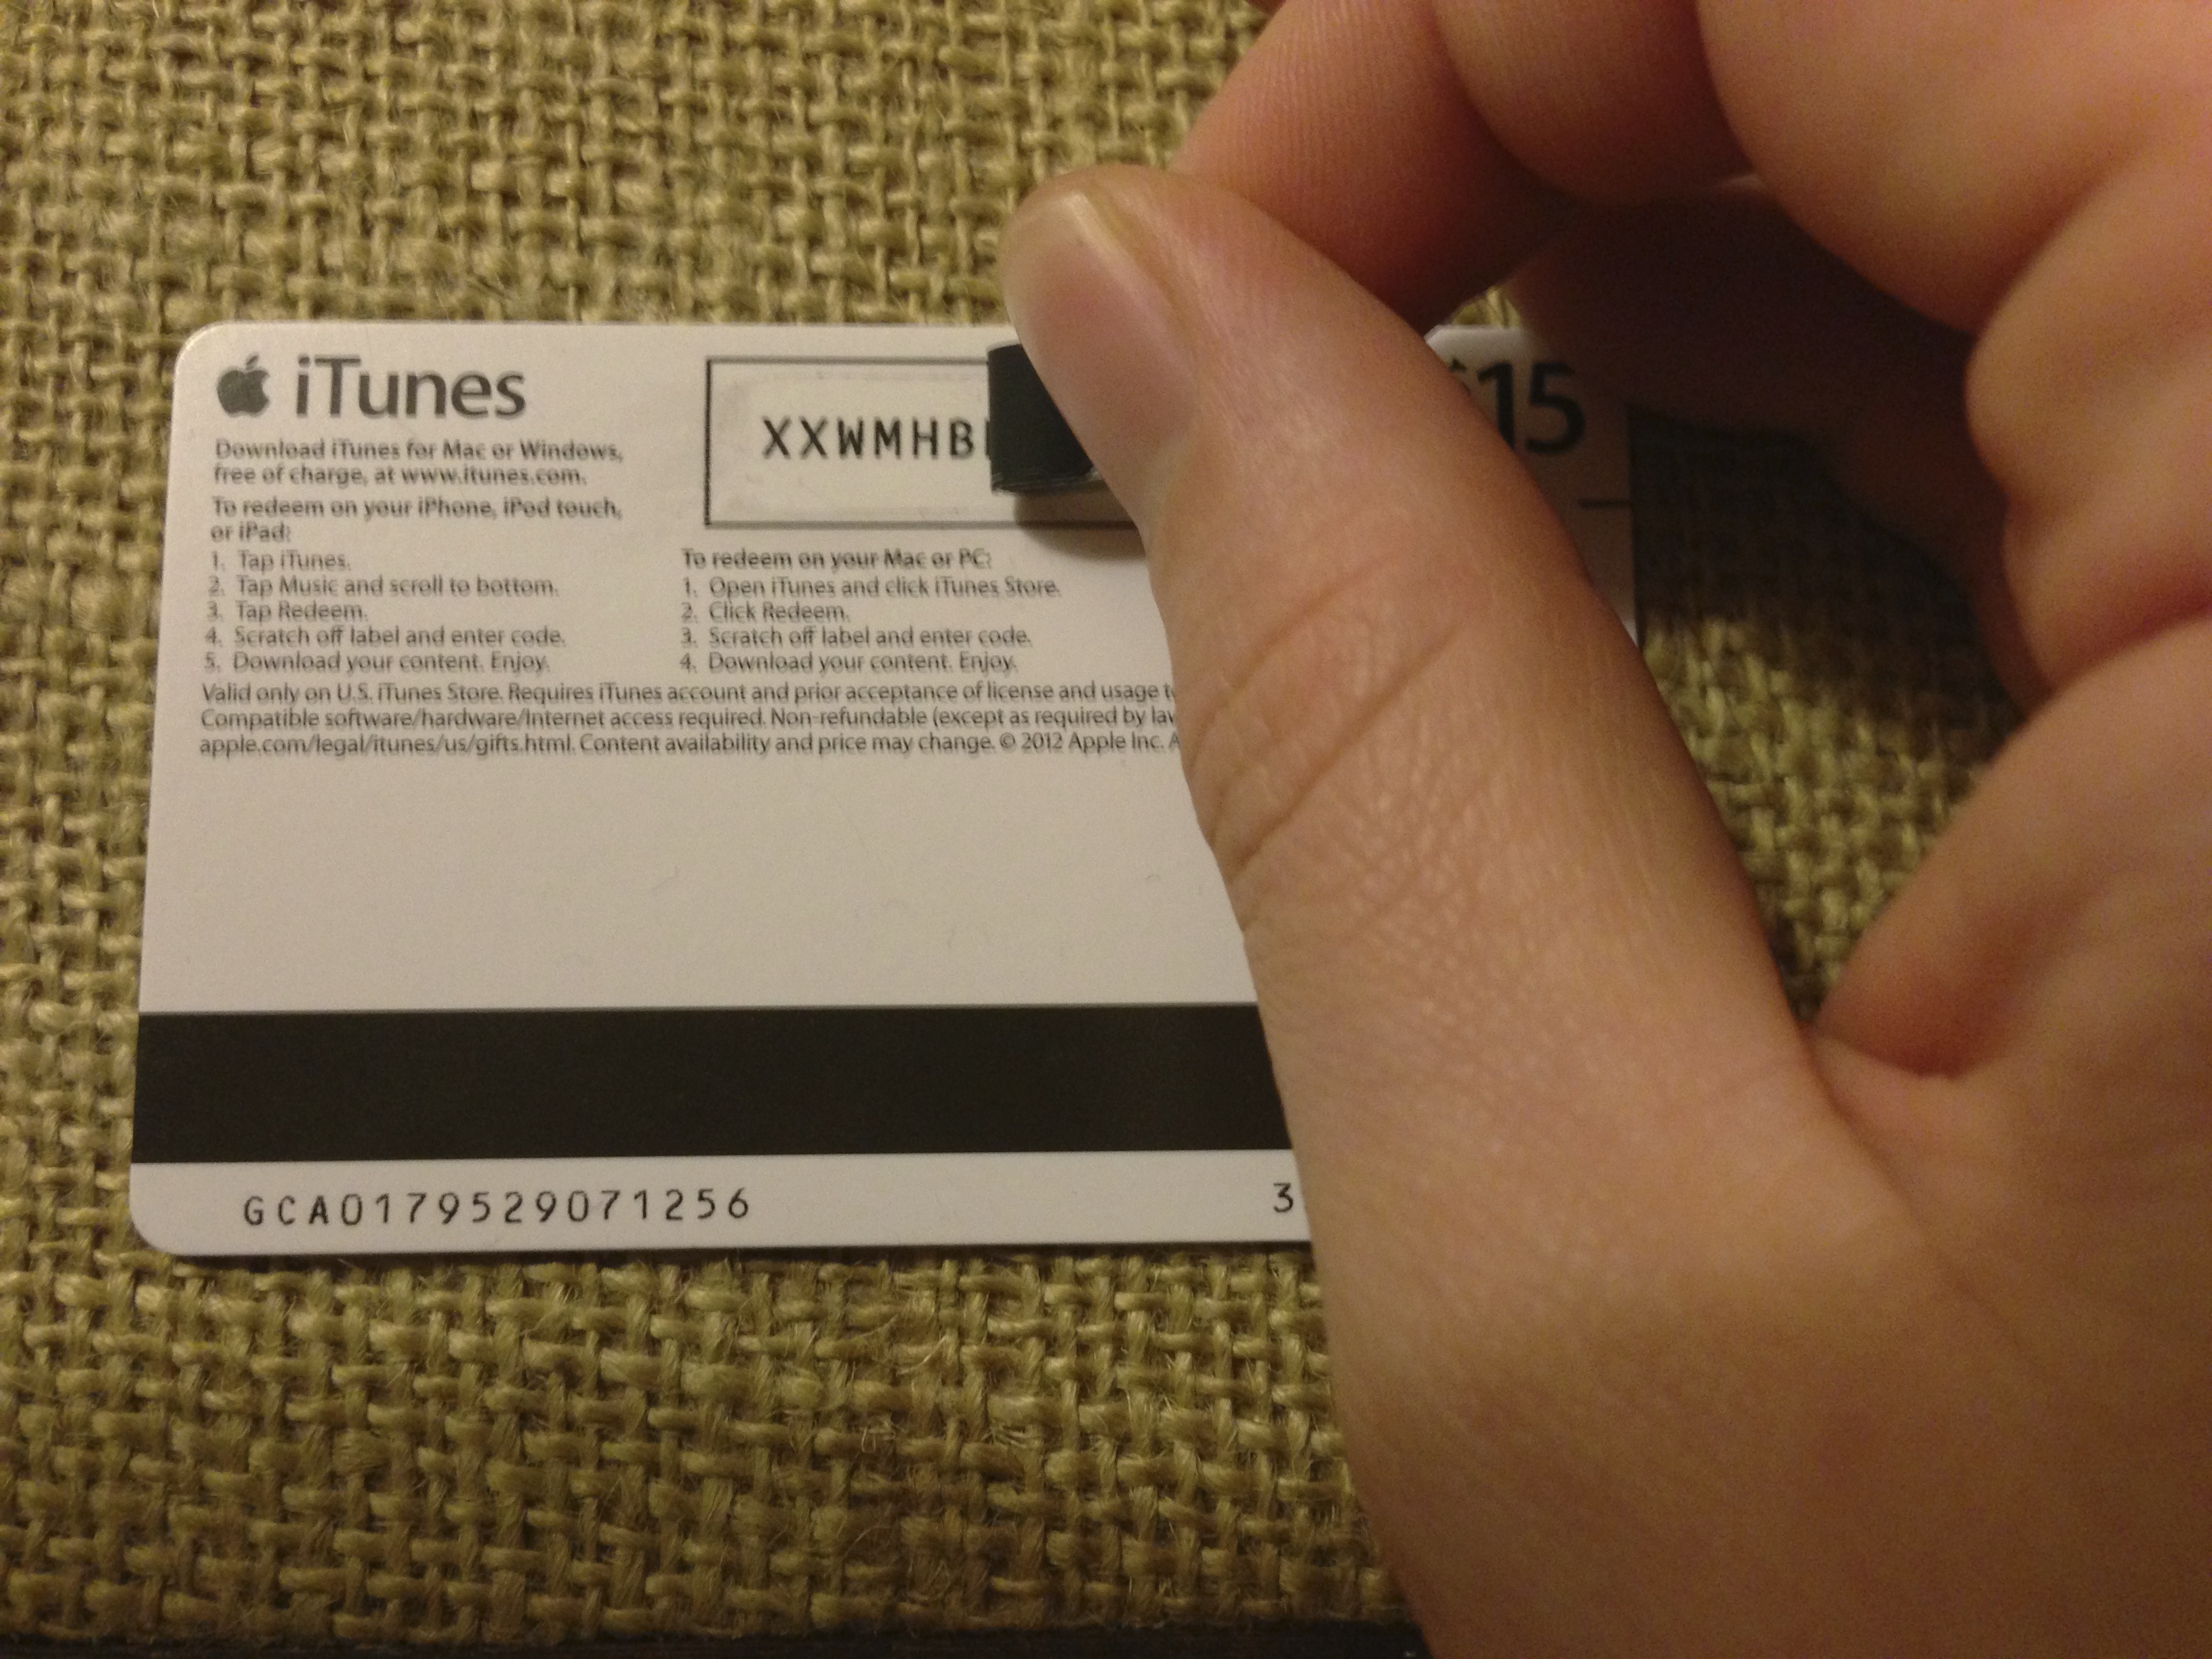 Apple Improves iTunes Gift Card Redemptions for the Holidays - TidBITS